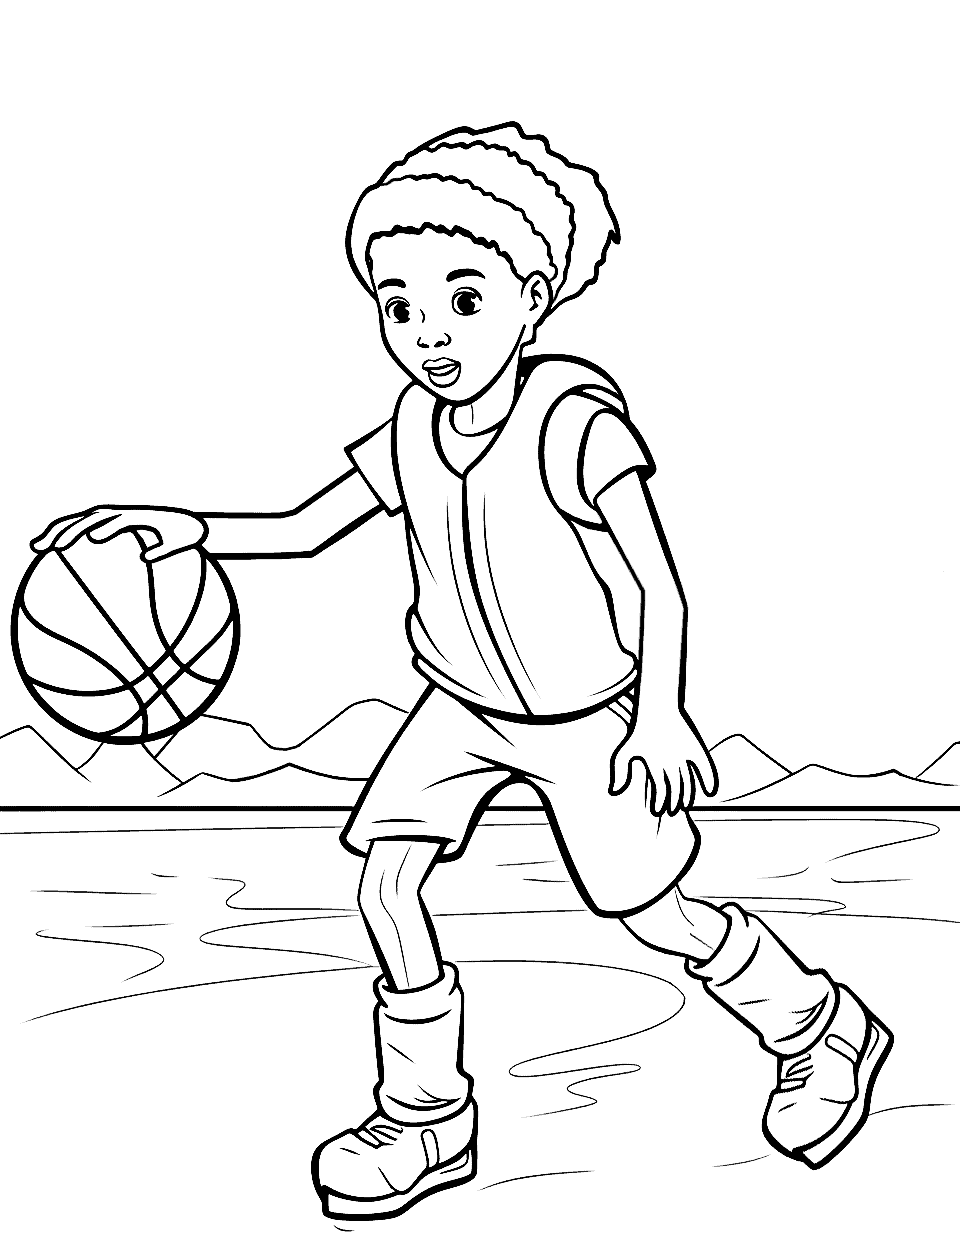 Arctic Ice Court Challenge Basketball Coloring Page - A girl in winter gear playing basketball on an ice court in the Arctic.